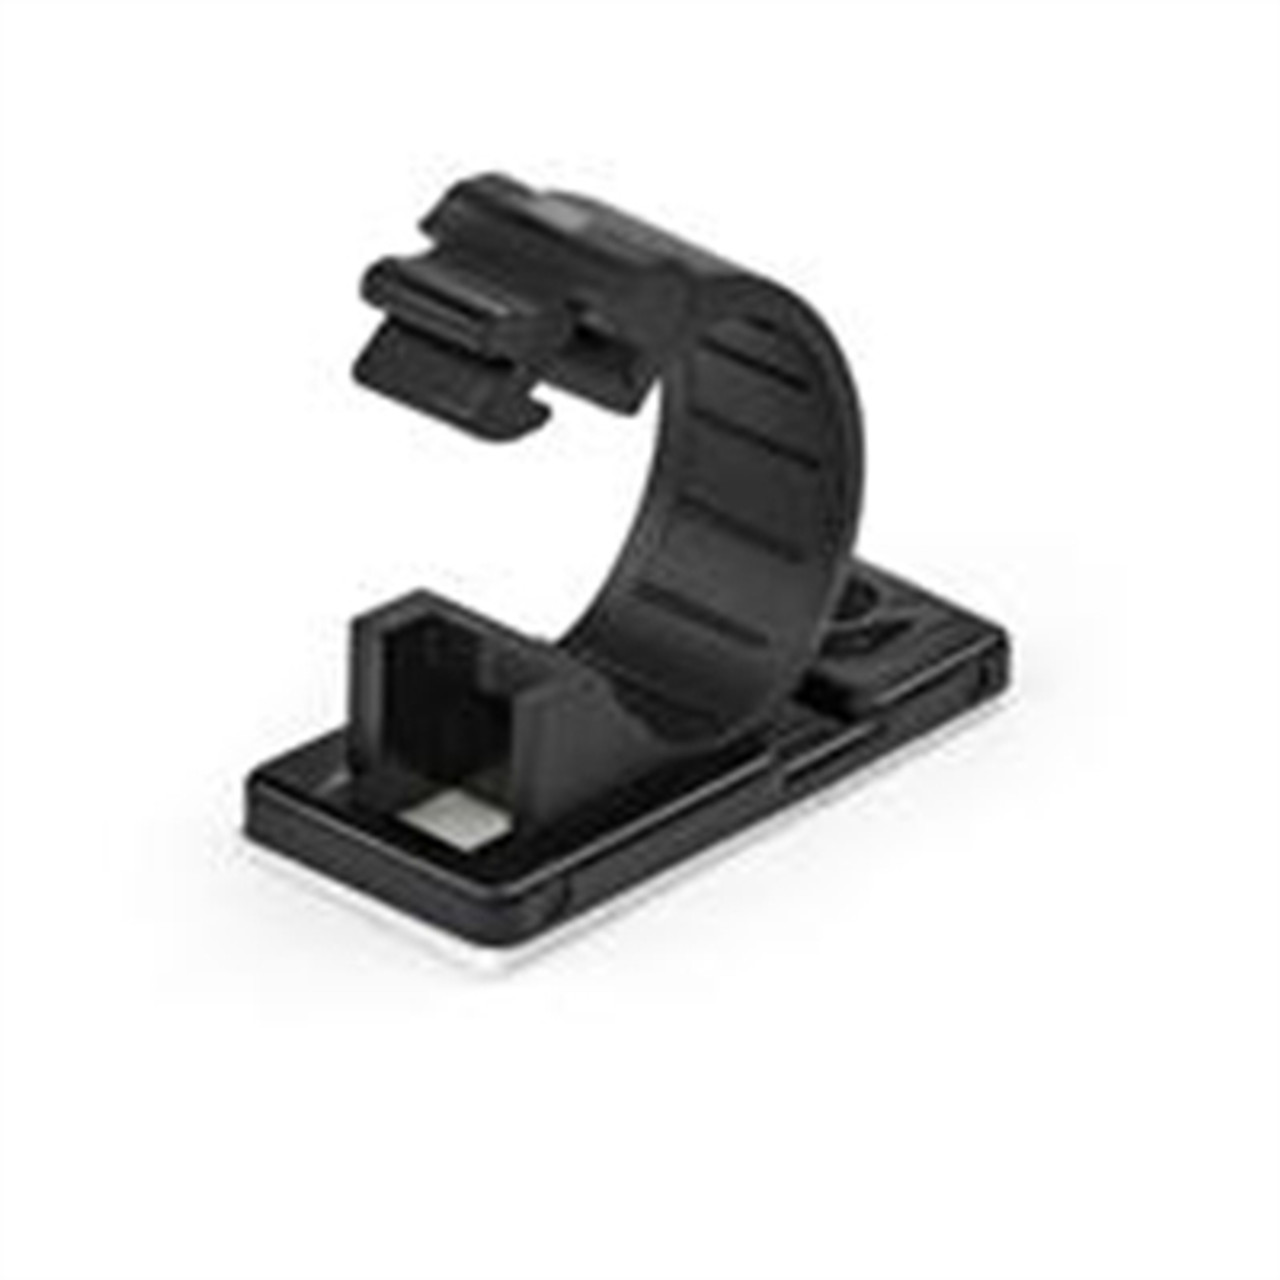 StarTech.com CBMCC2 100 Self Adhesive Cable Management Clips -  Ethernet/Network Cable/Office Desk Cord Organizer - Sticky Wire  Holder/Clamp Black